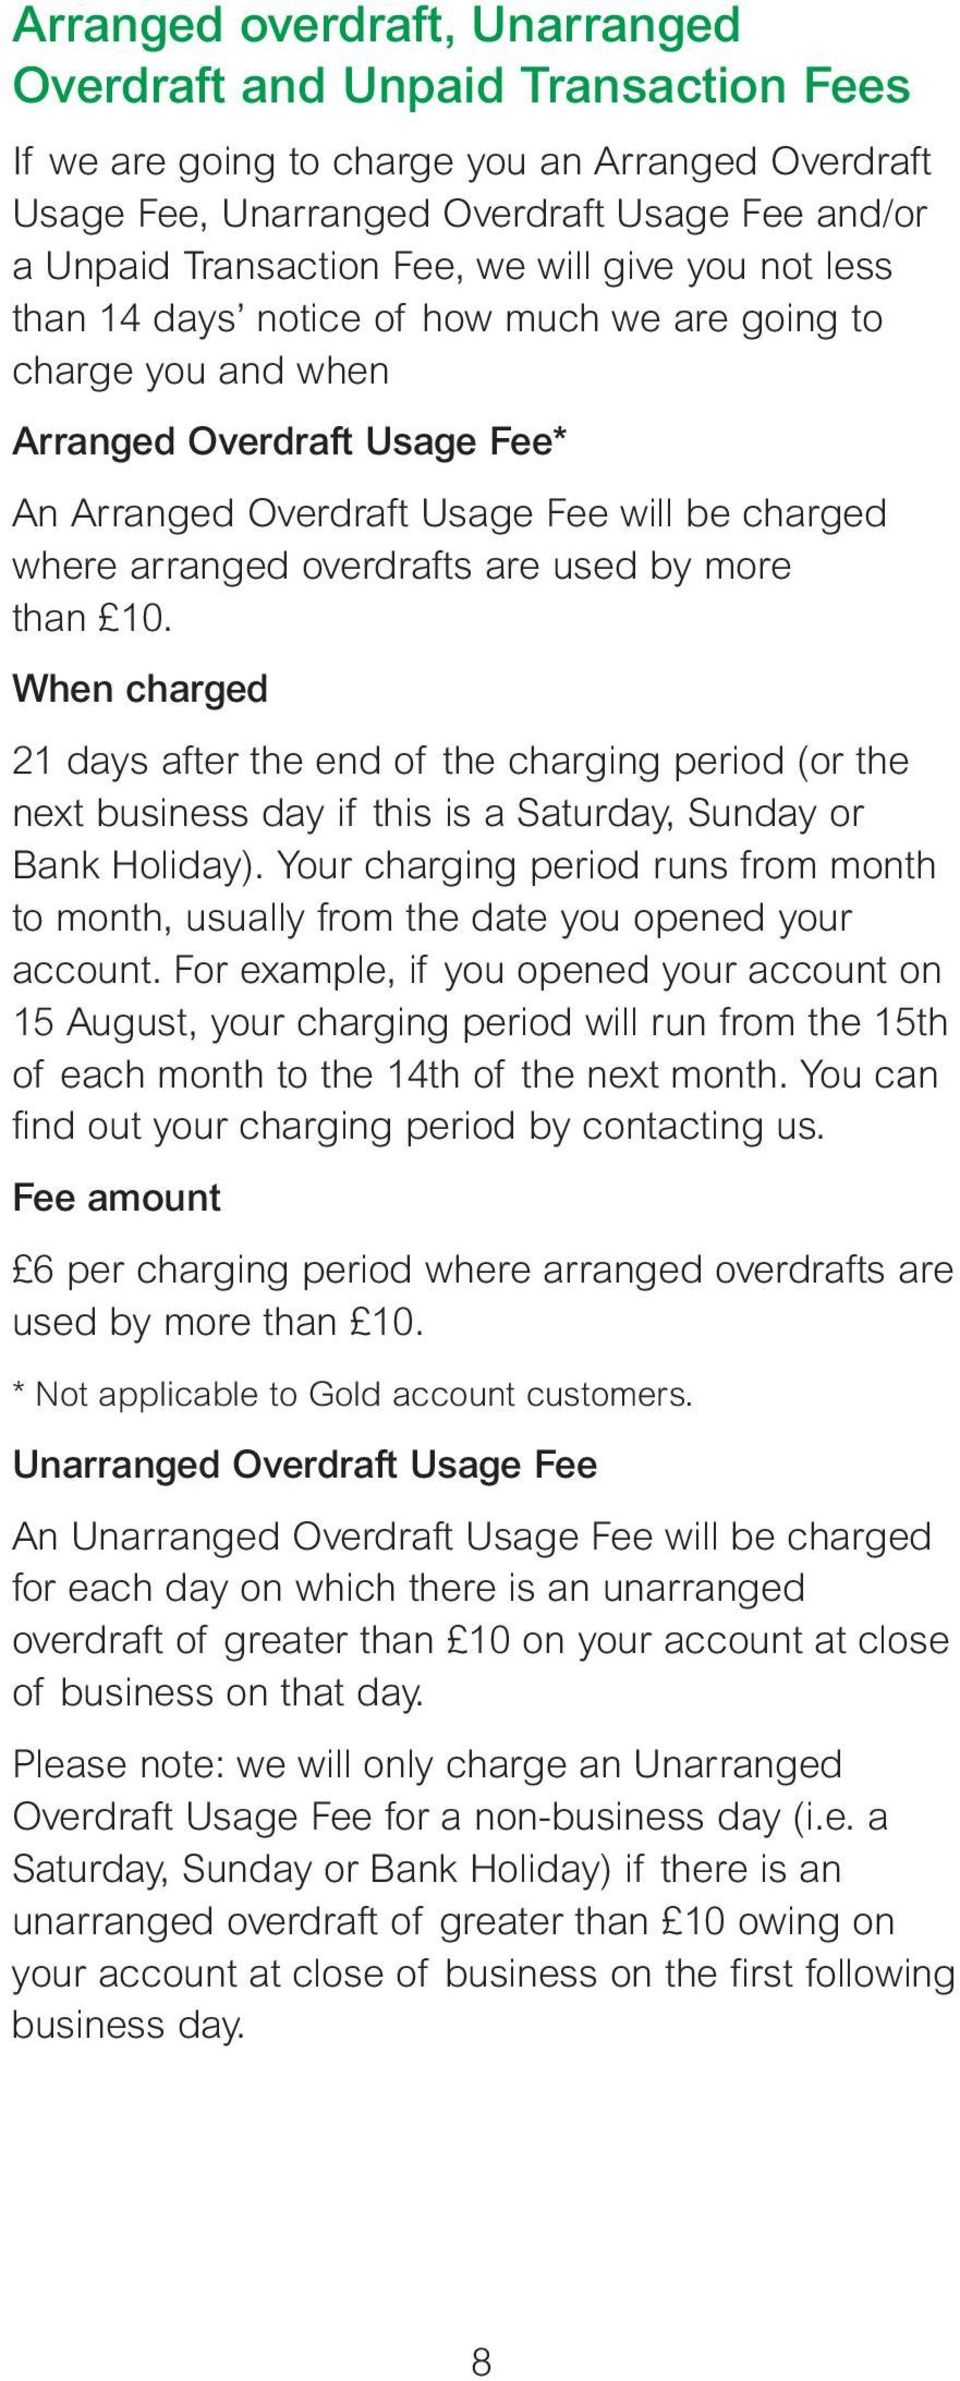 used by more than 10. When charged 21 days after the end of the charging period (or the next business day if this is a Saturday, Sunday or Bank Holiday).